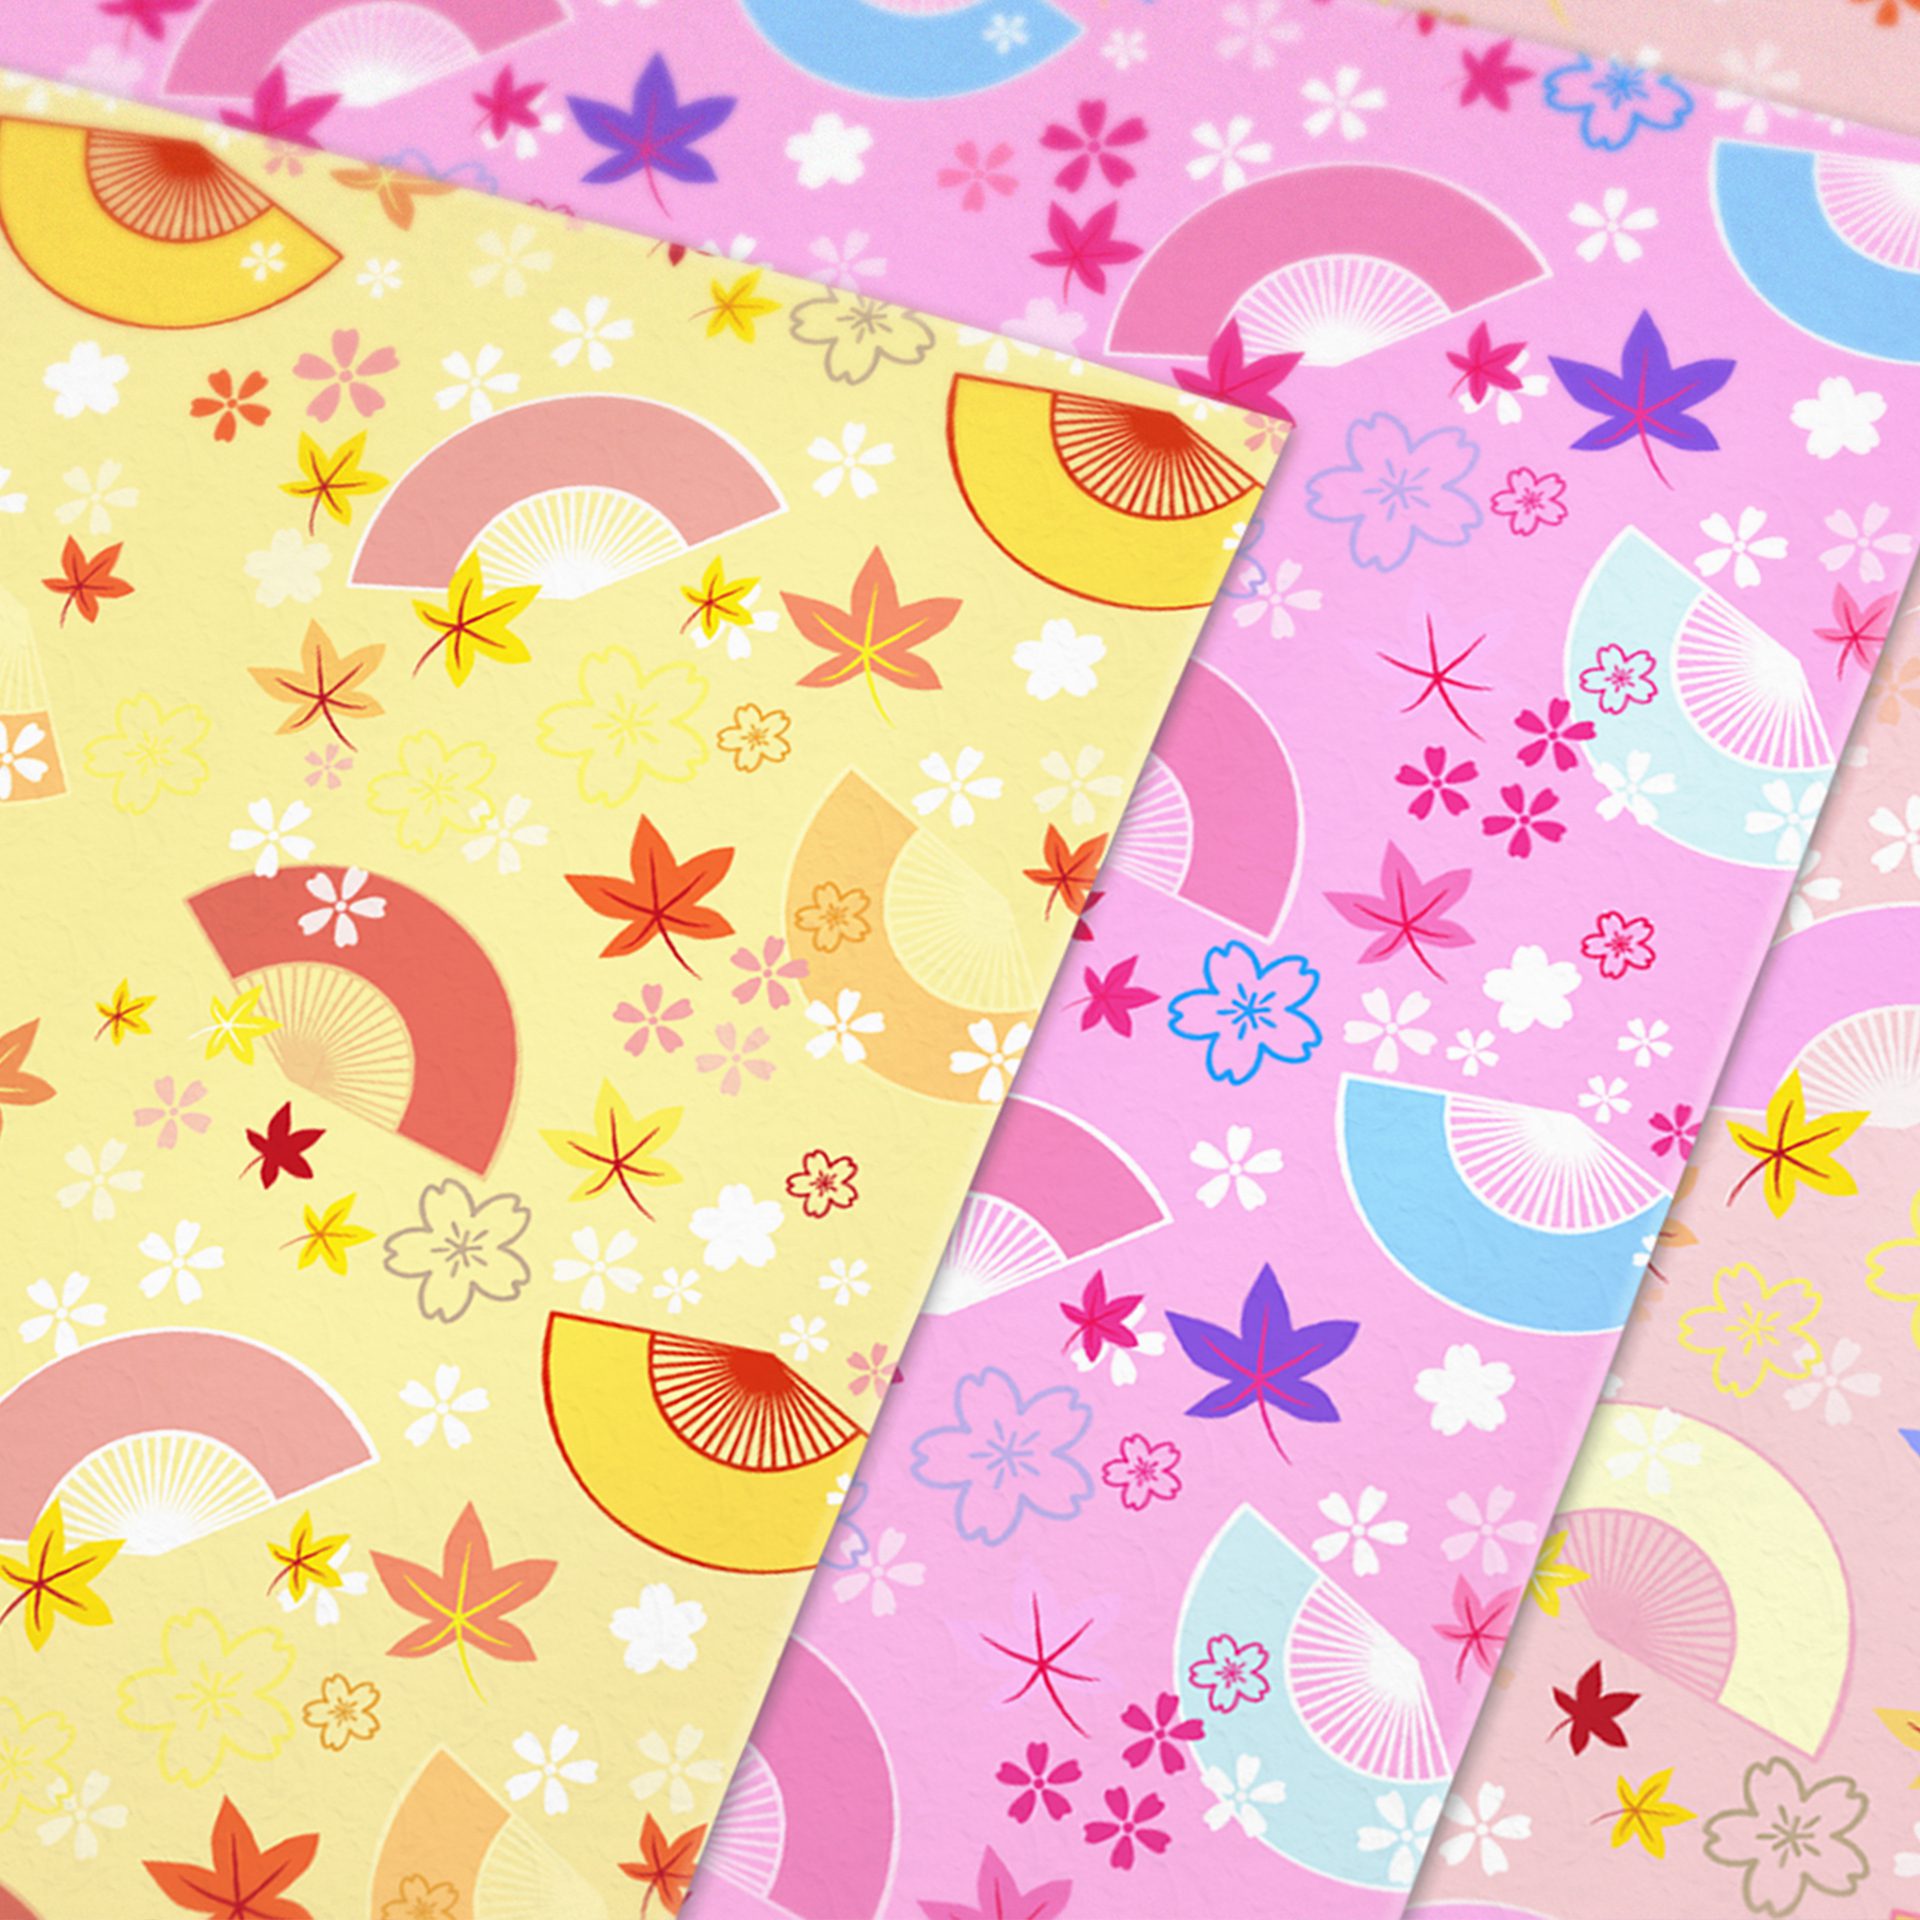 Japanese Seigaiha Dotted Origami Paper - Paper Kawaii Shop